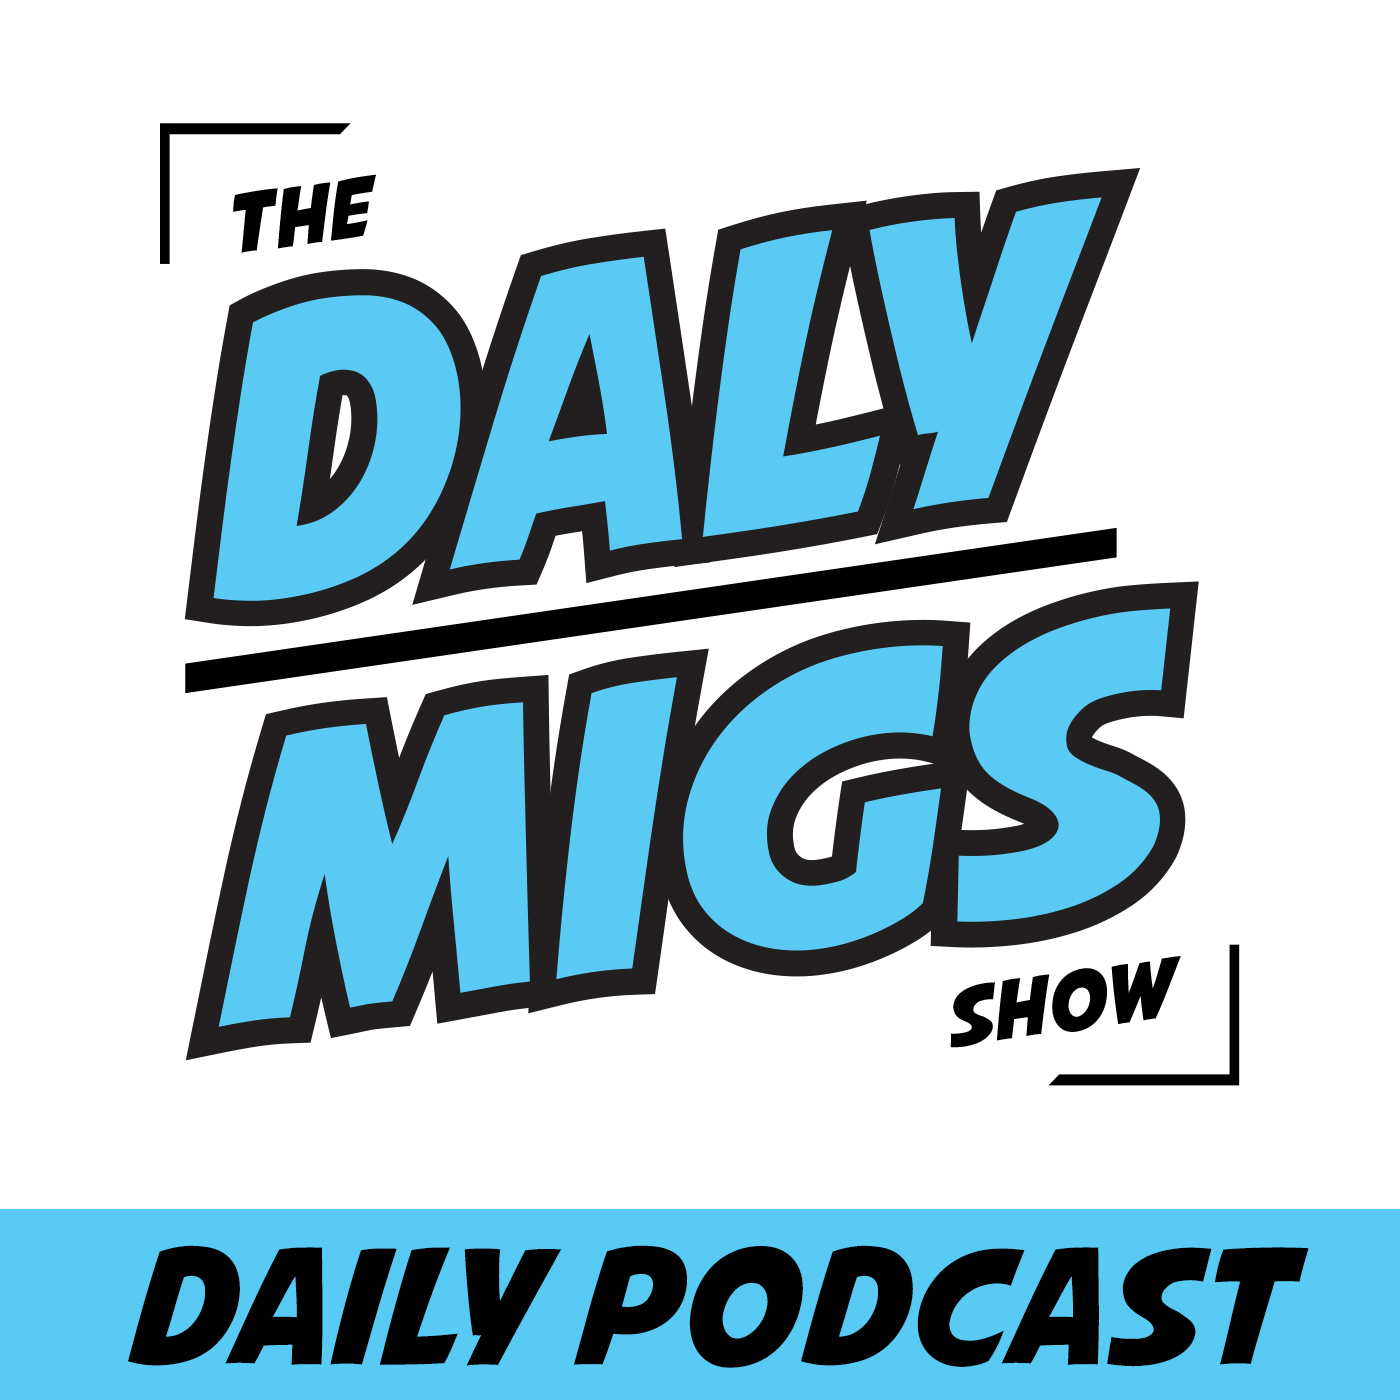 Daily Podcast pt. 3 - "Sara is mad at someone for parking in 'her' space"